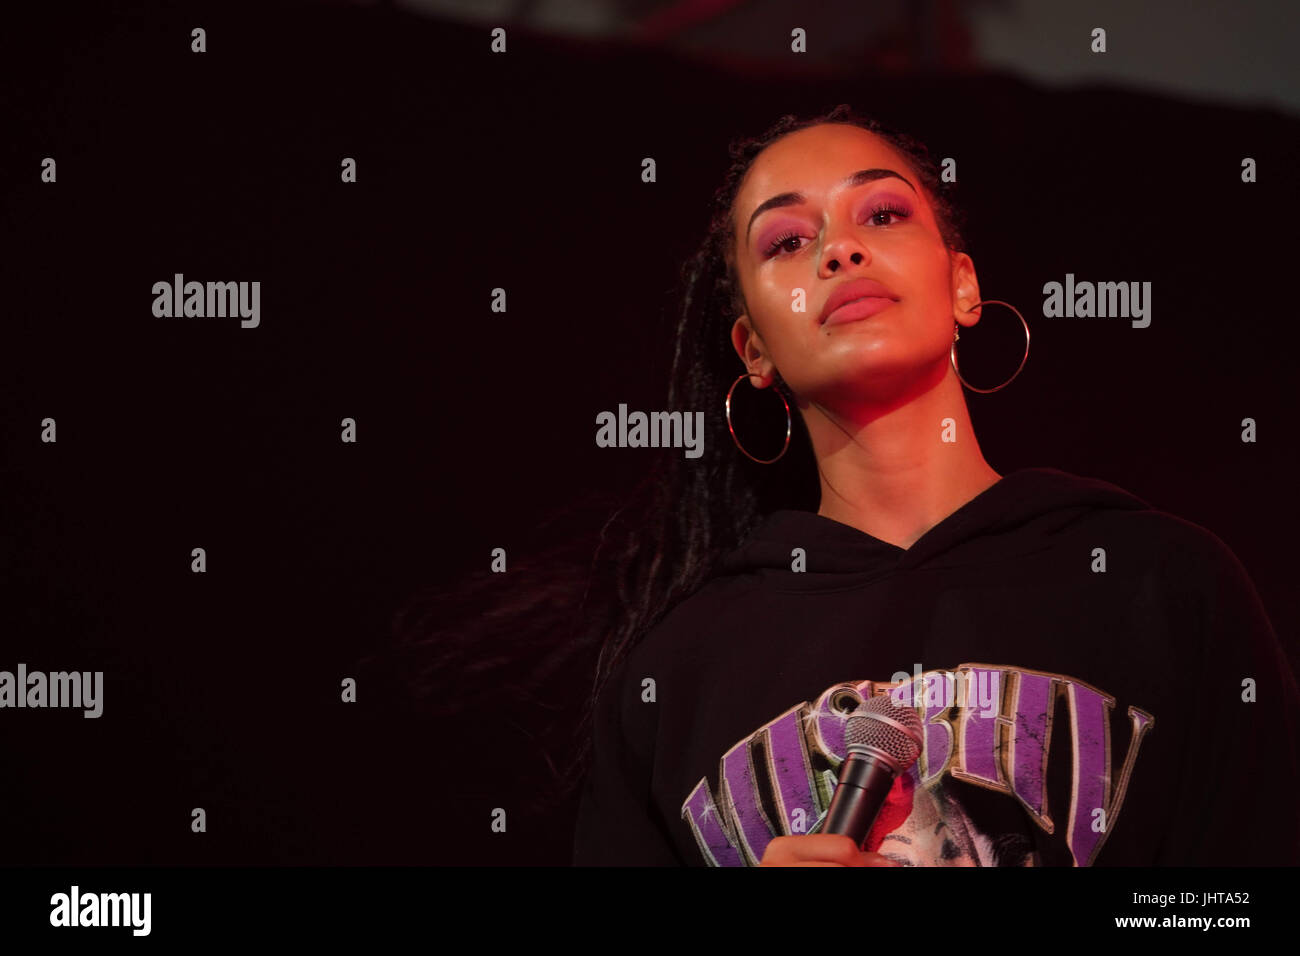 Latitude Festival, UK. 15th July, 2017. Jorja Smith performing live on the Lake stage at the 2017 Latitude festival in Henham Park, Southwold in Suffolk. Photo date: Saturday, July 15, 2017. Photo credit should read: Roger Garfield/Alamy Live News. Stock Photo